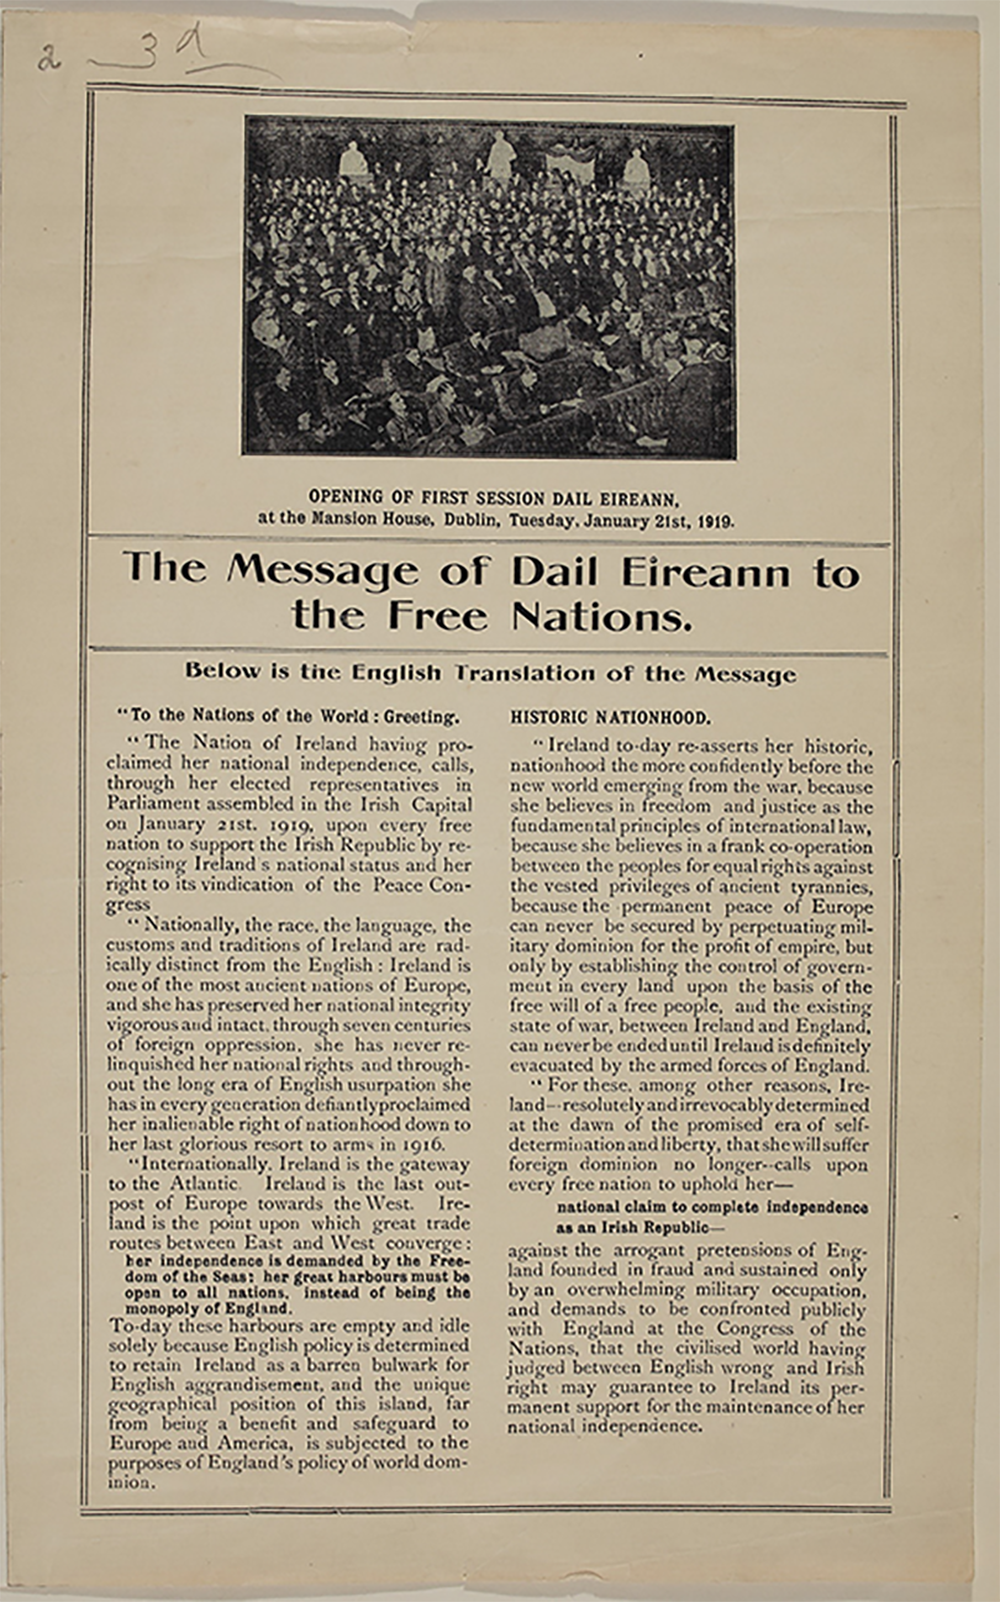 The Message of Dail Eireann to the Free Nations